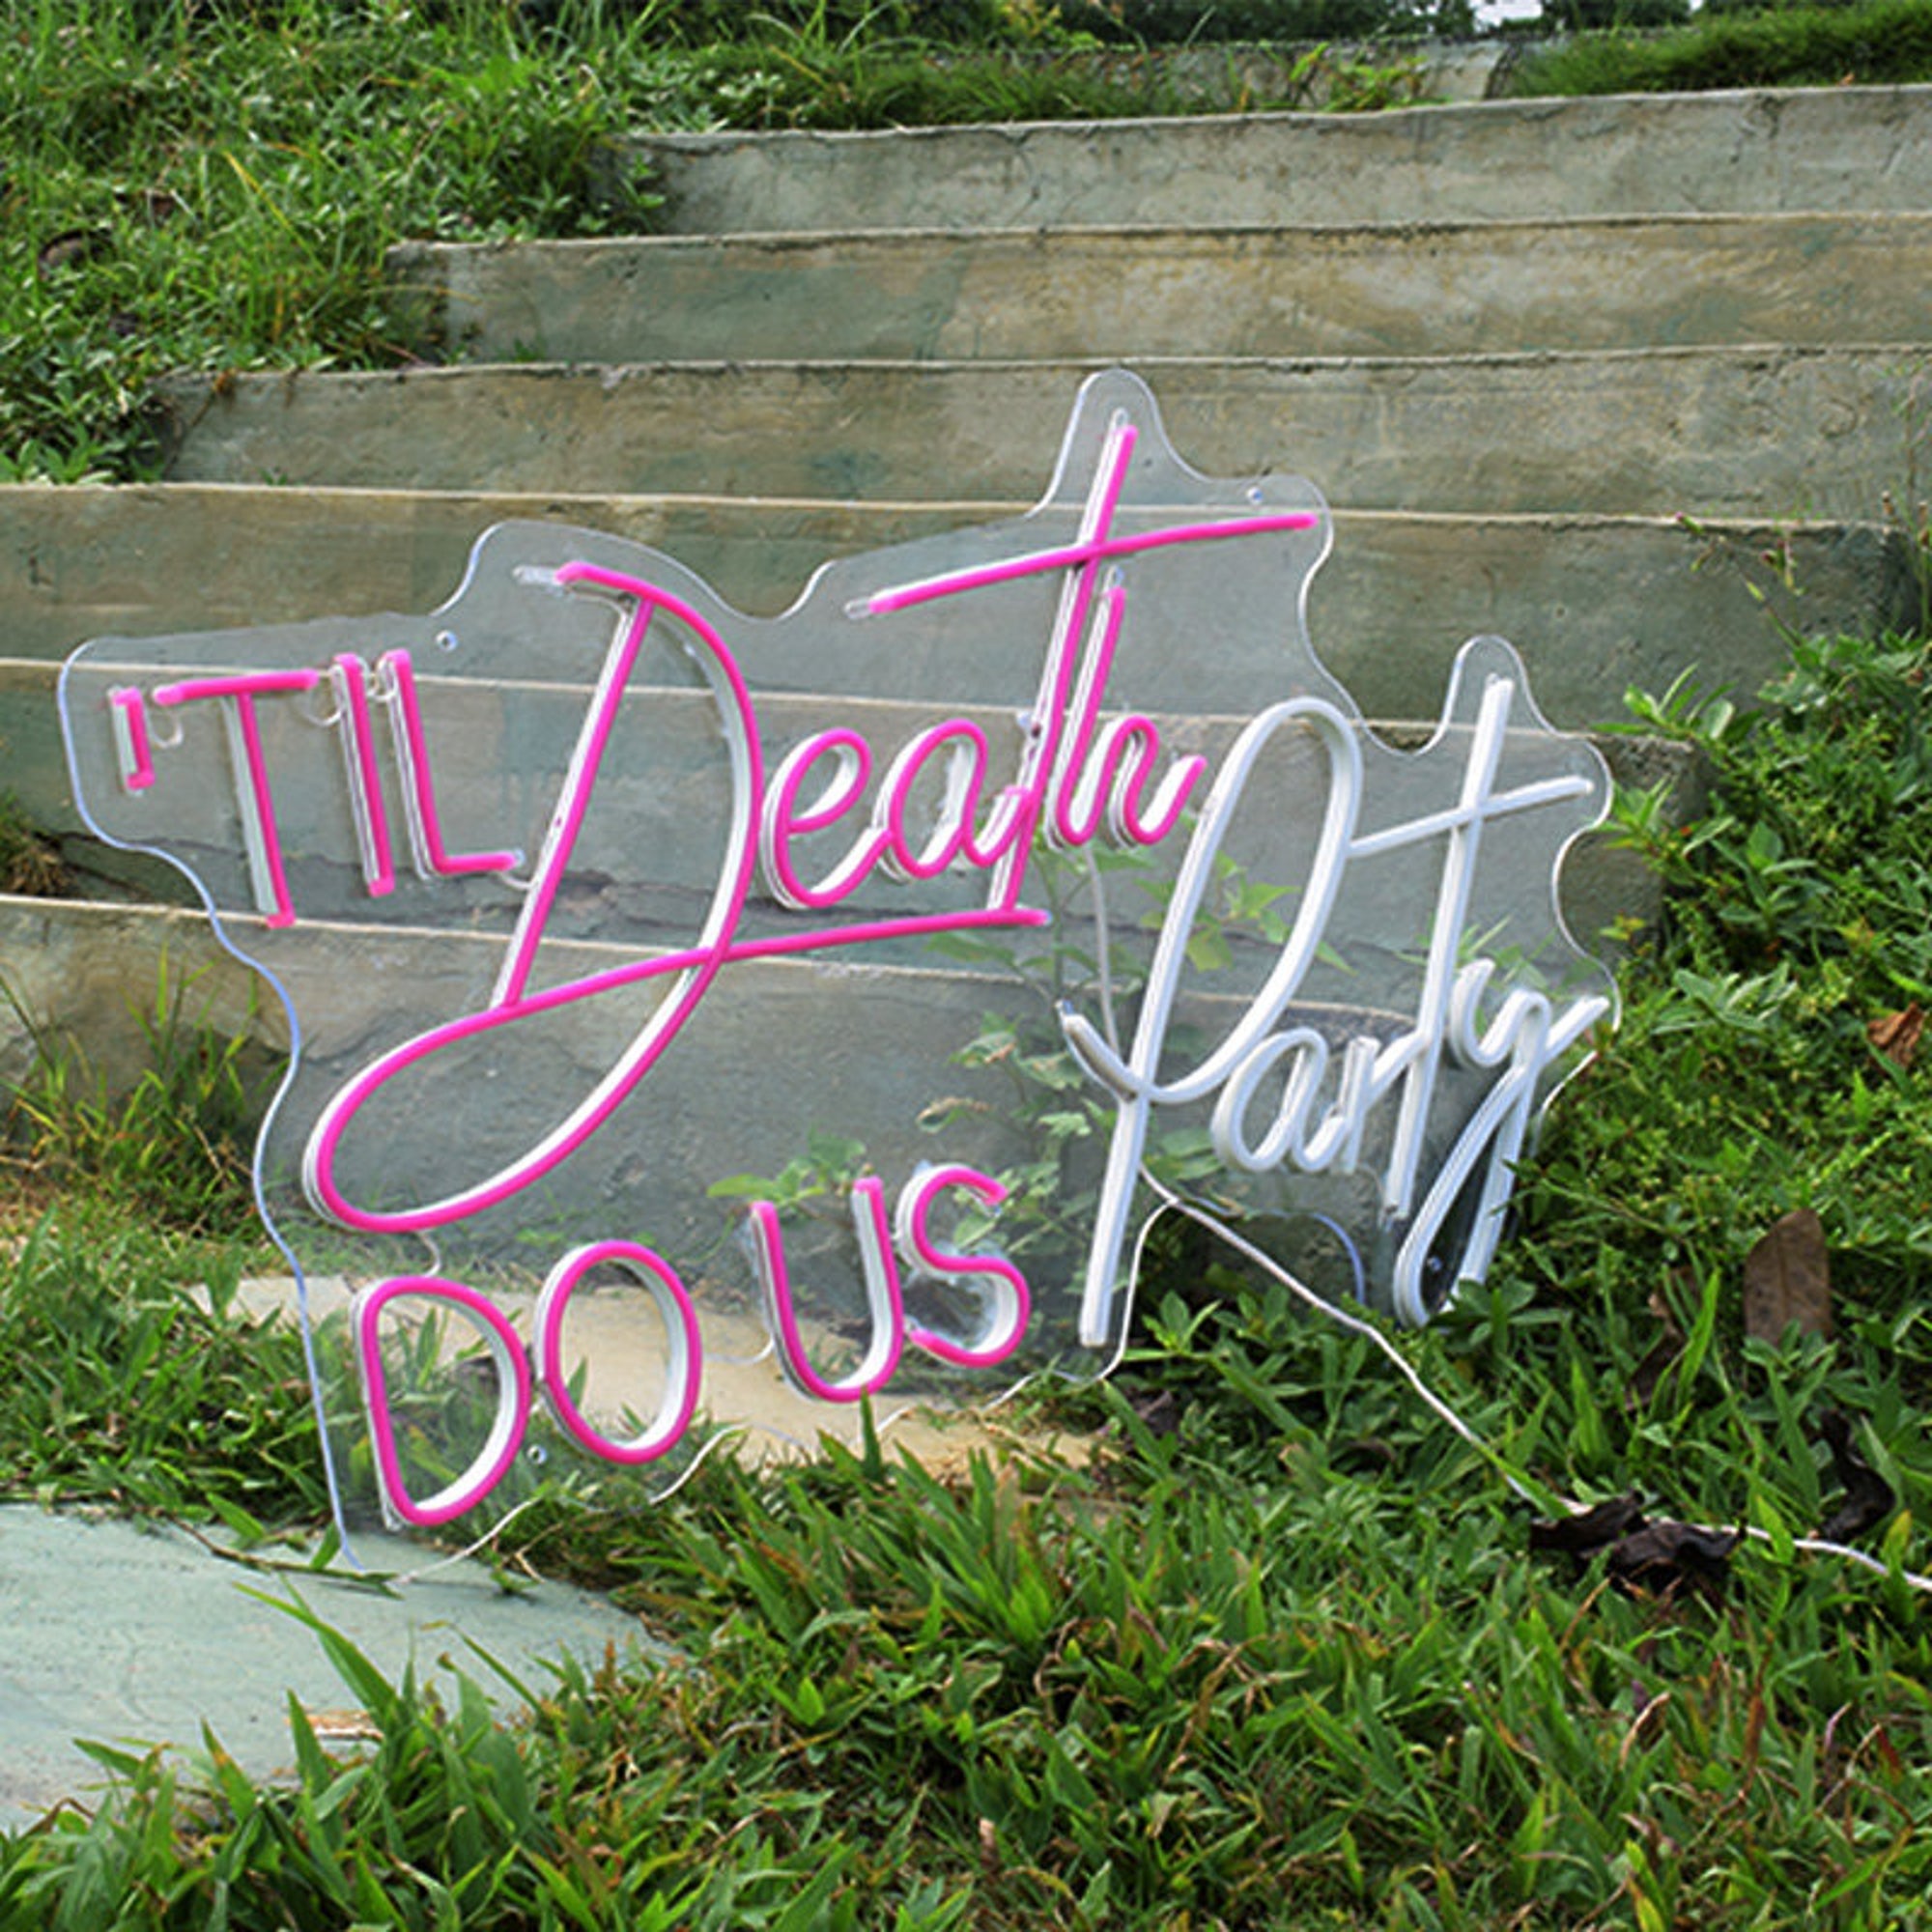 29in x 17in Til Death DO US Party Neon Sign Flex Led Neon Light Custom Led Neon Sign Home Room Decoration Ins Party Wedding